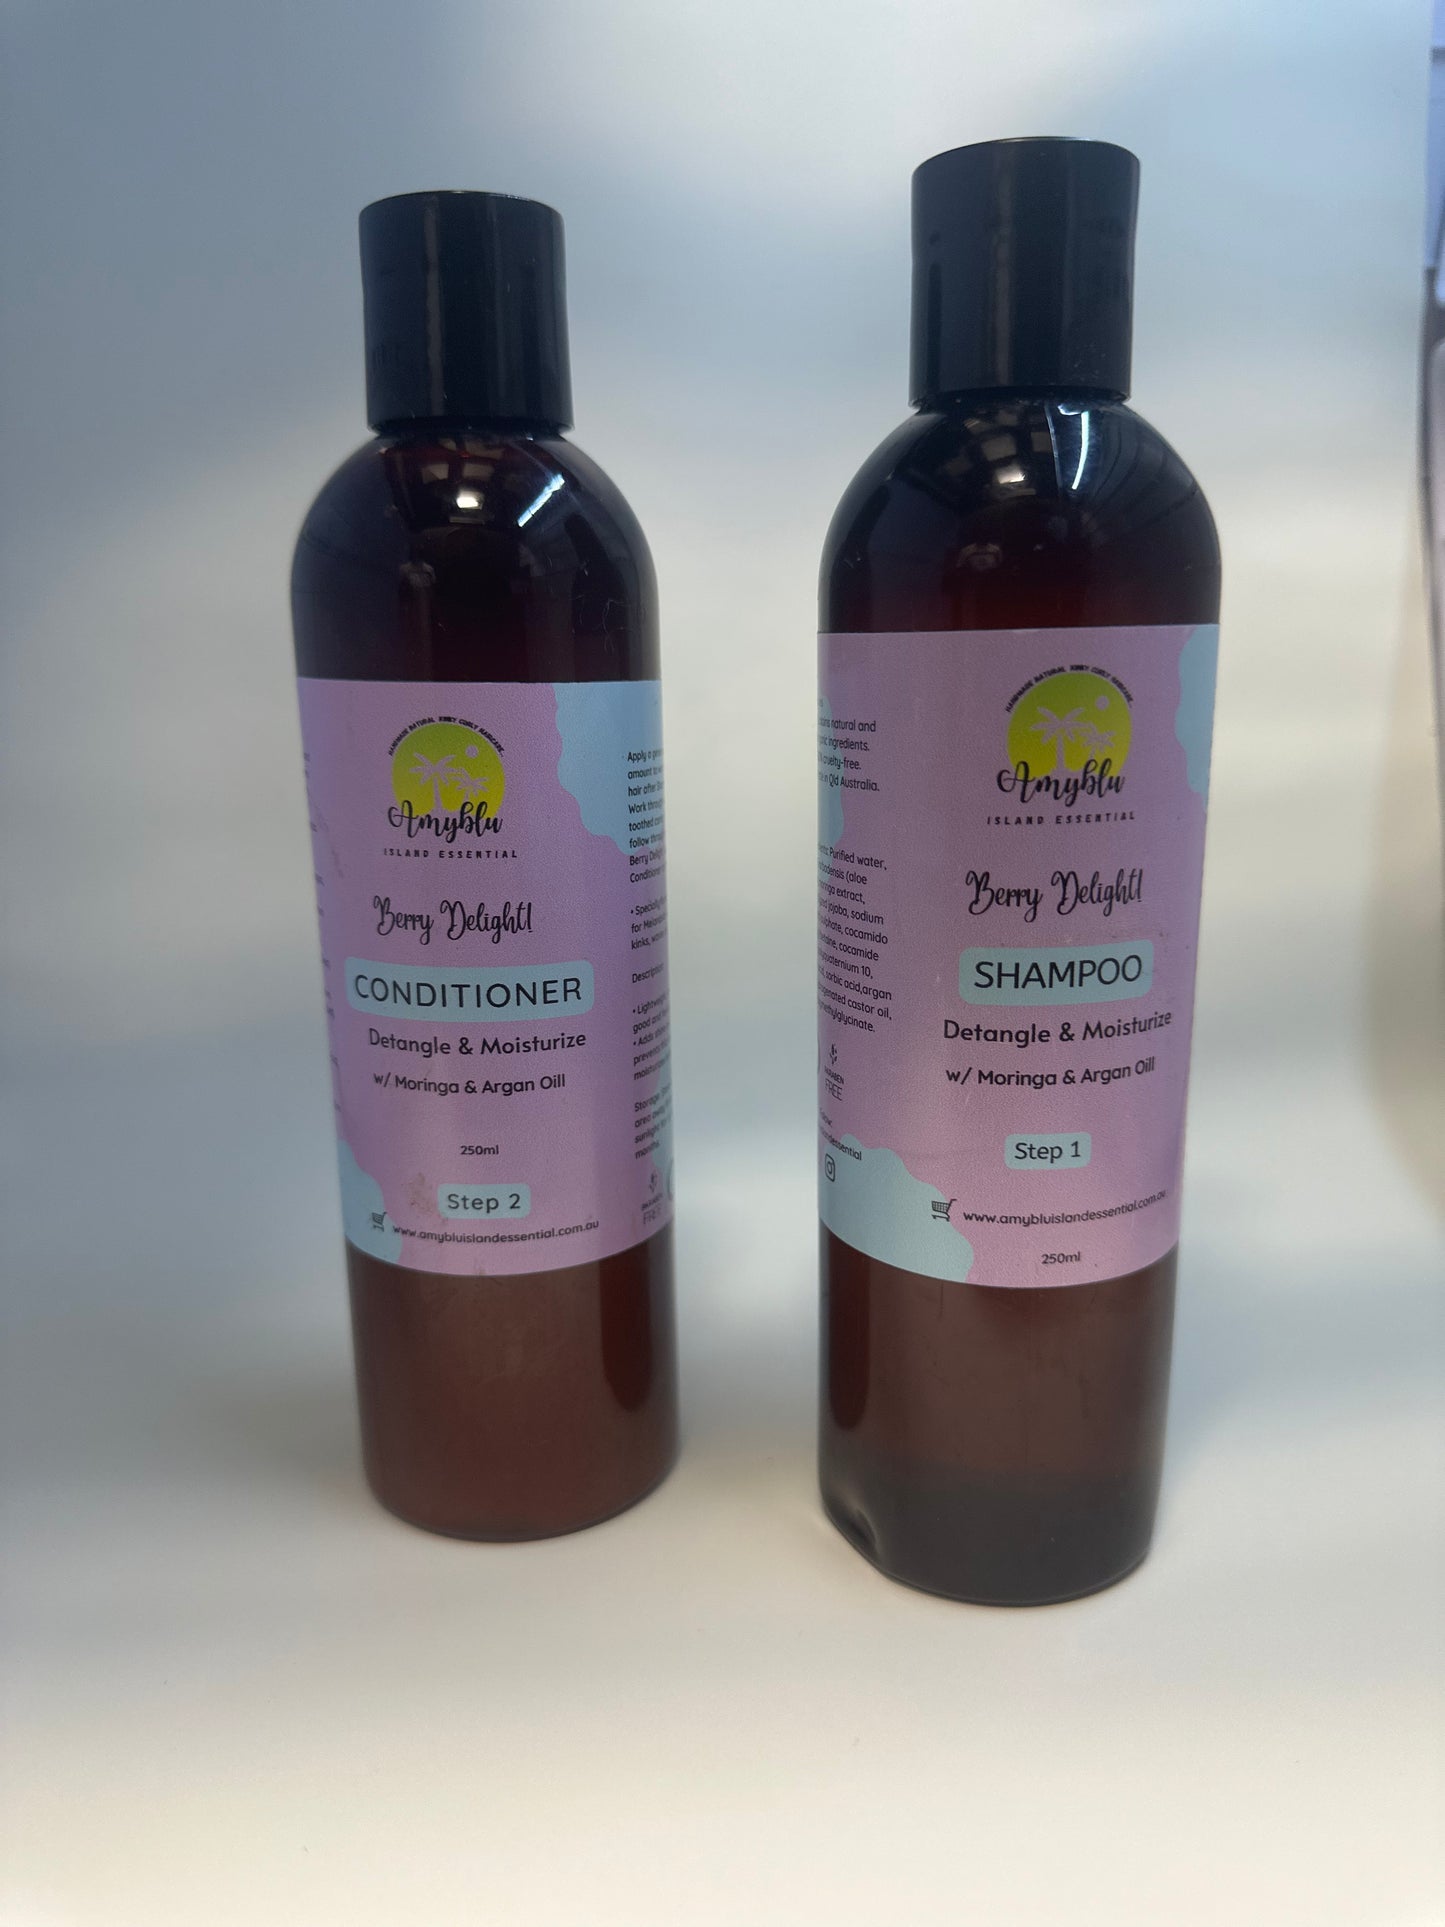 Berry Curls Shampoo and Condtioner: Curly Kids Paraben and Sulphate FREE